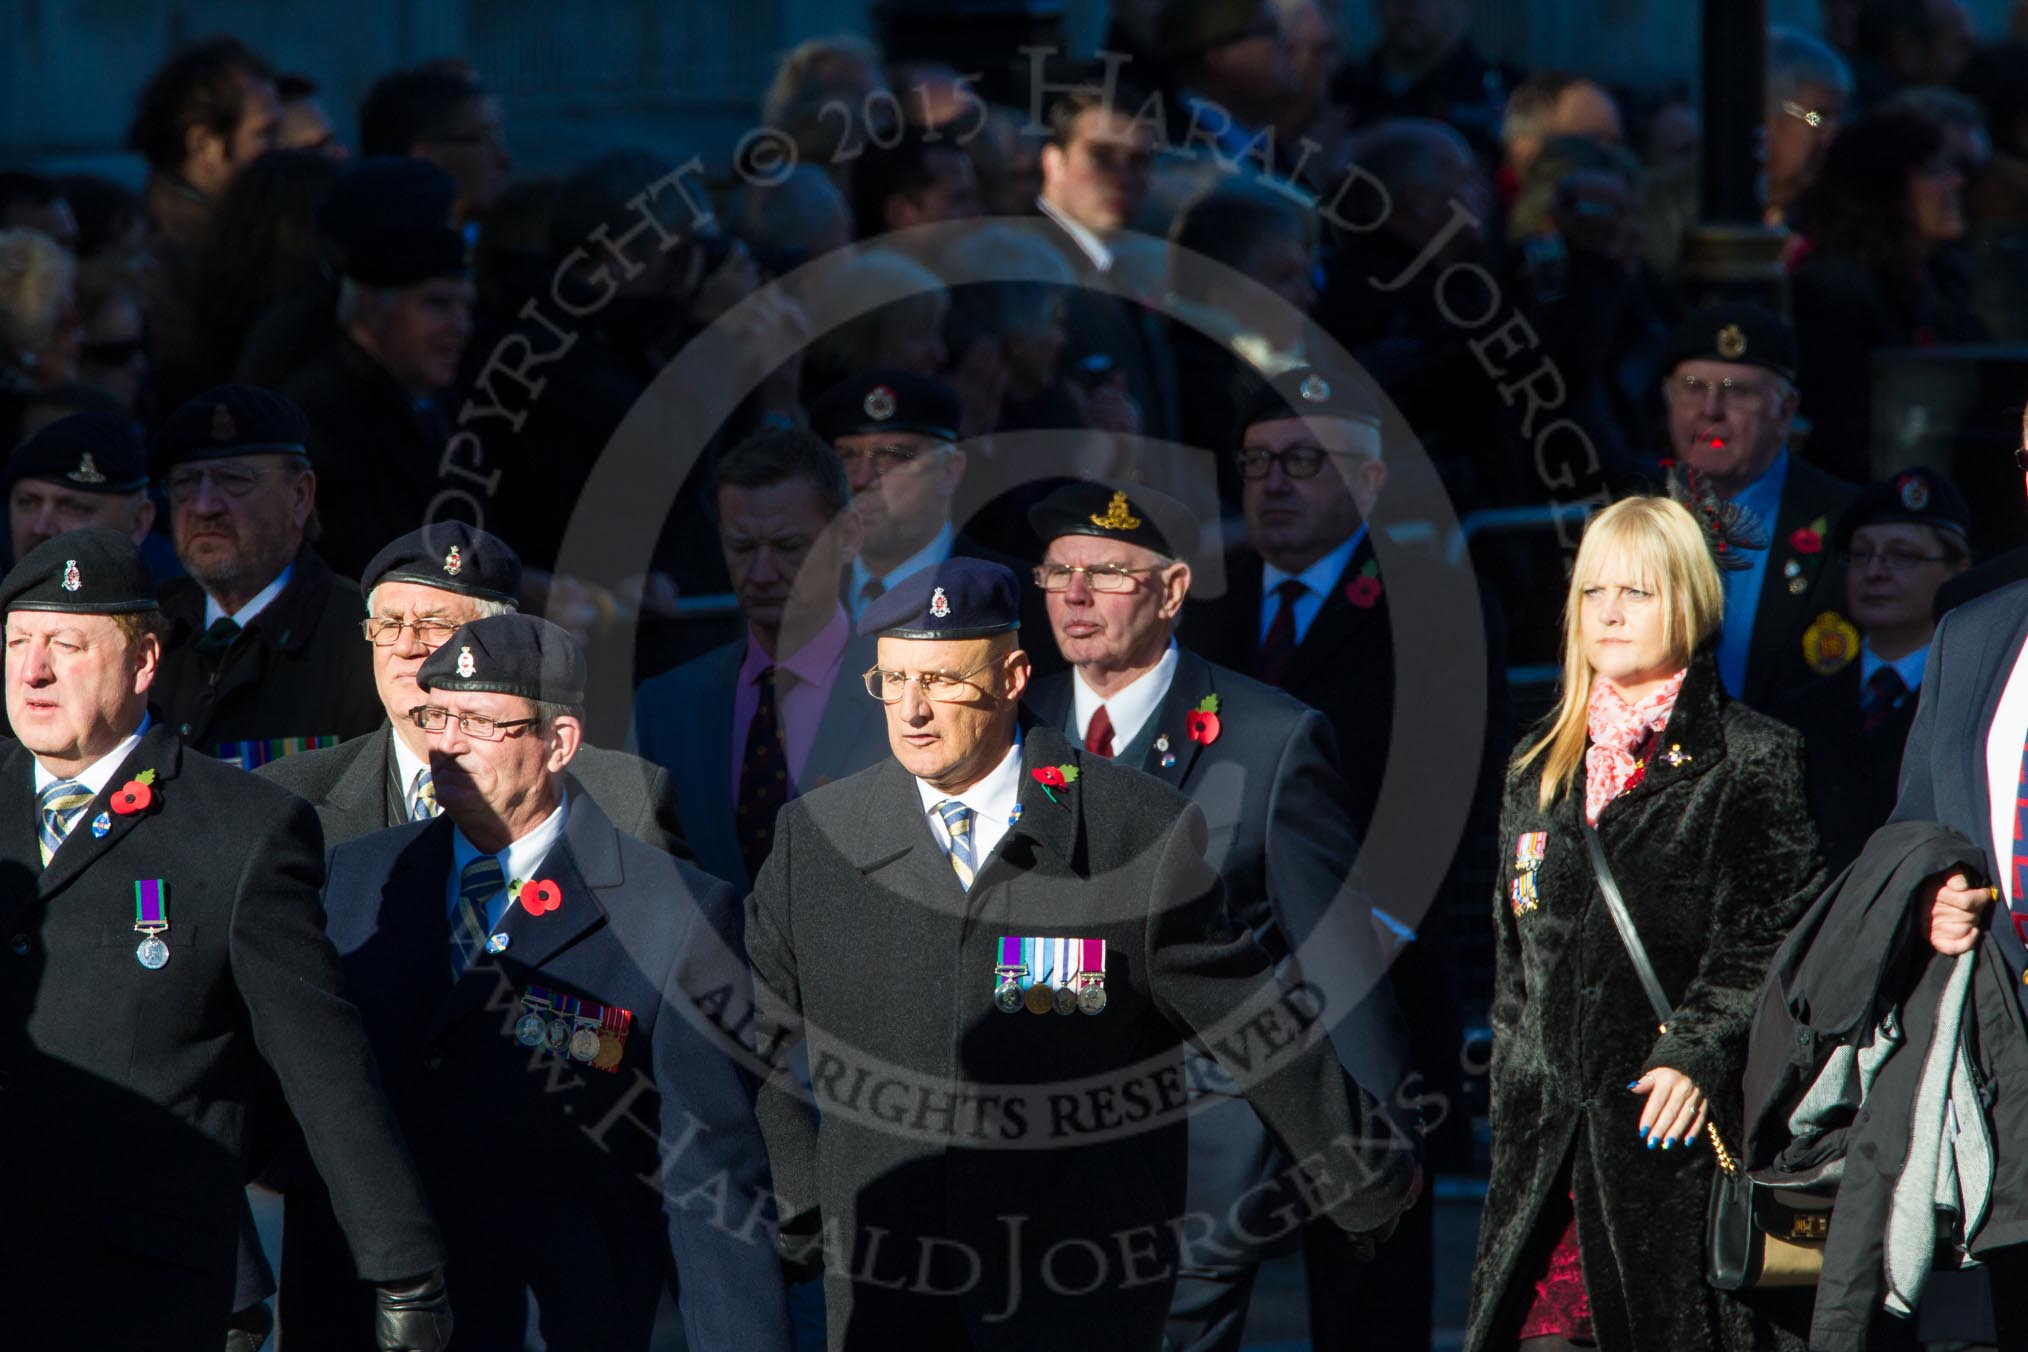 Remembrance Sunday Cenotaph March Past 2013: B18 - 3rd Regiment Royal Horse Artillery Association..
Press stand opposite the Foreign Office building, Whitehall, London SW1,
London,
Greater London,
United Kingdom,
on 10 November 2013 at 12:01, image #1447